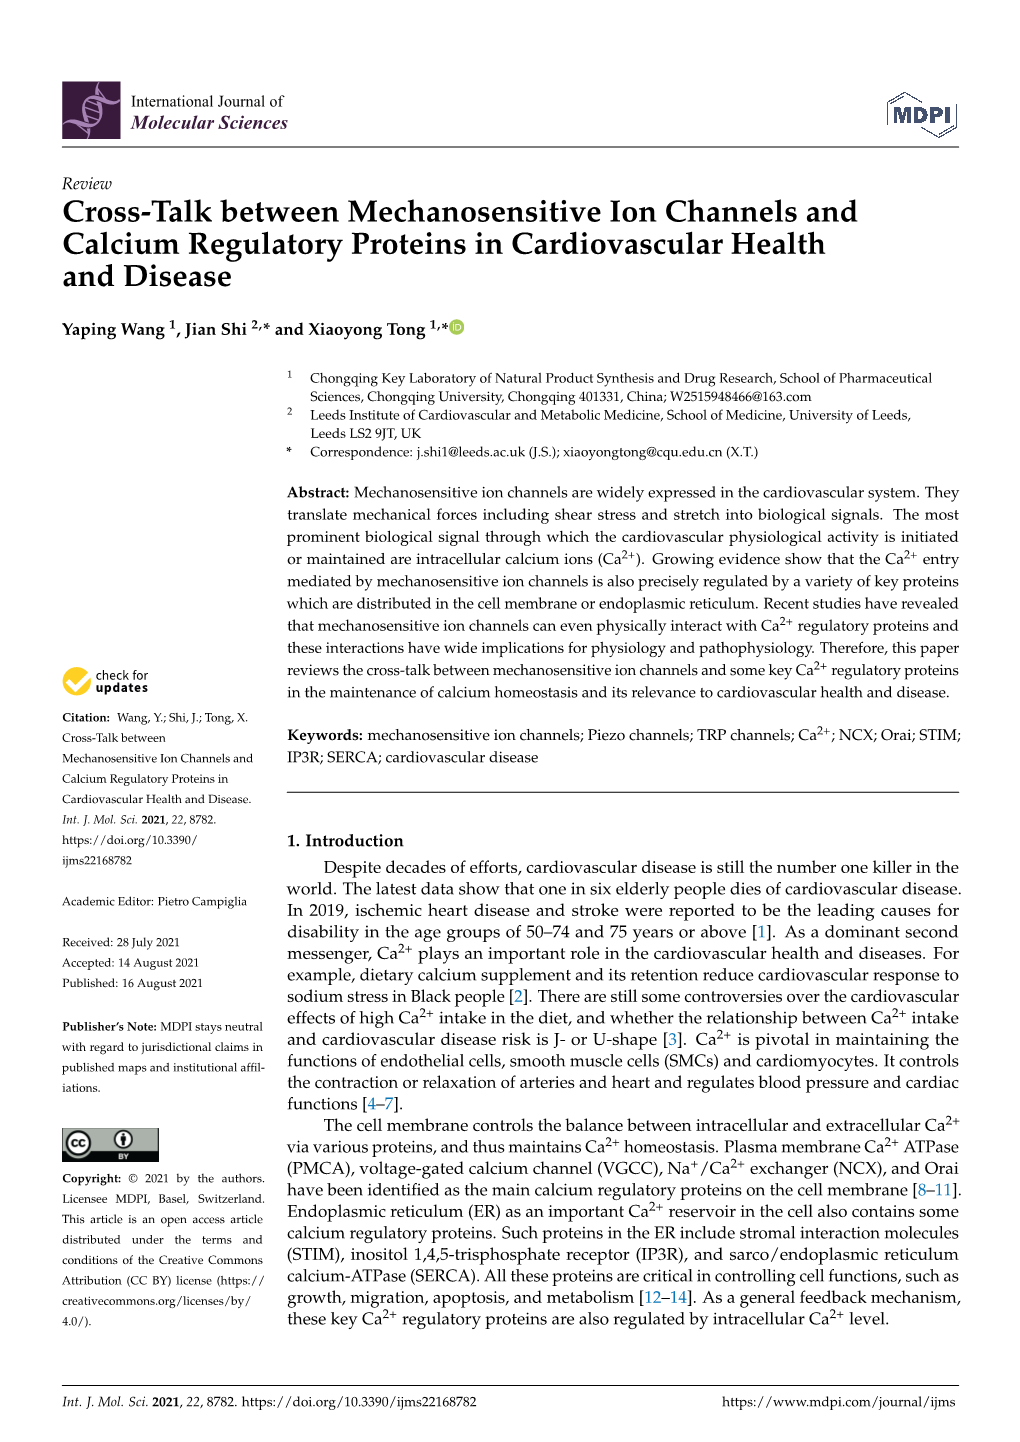 Cross-Talk Between Mechanosensitive Ion Channels and Calcium Regulatory Proteins in Cardiovascular Health and Disease